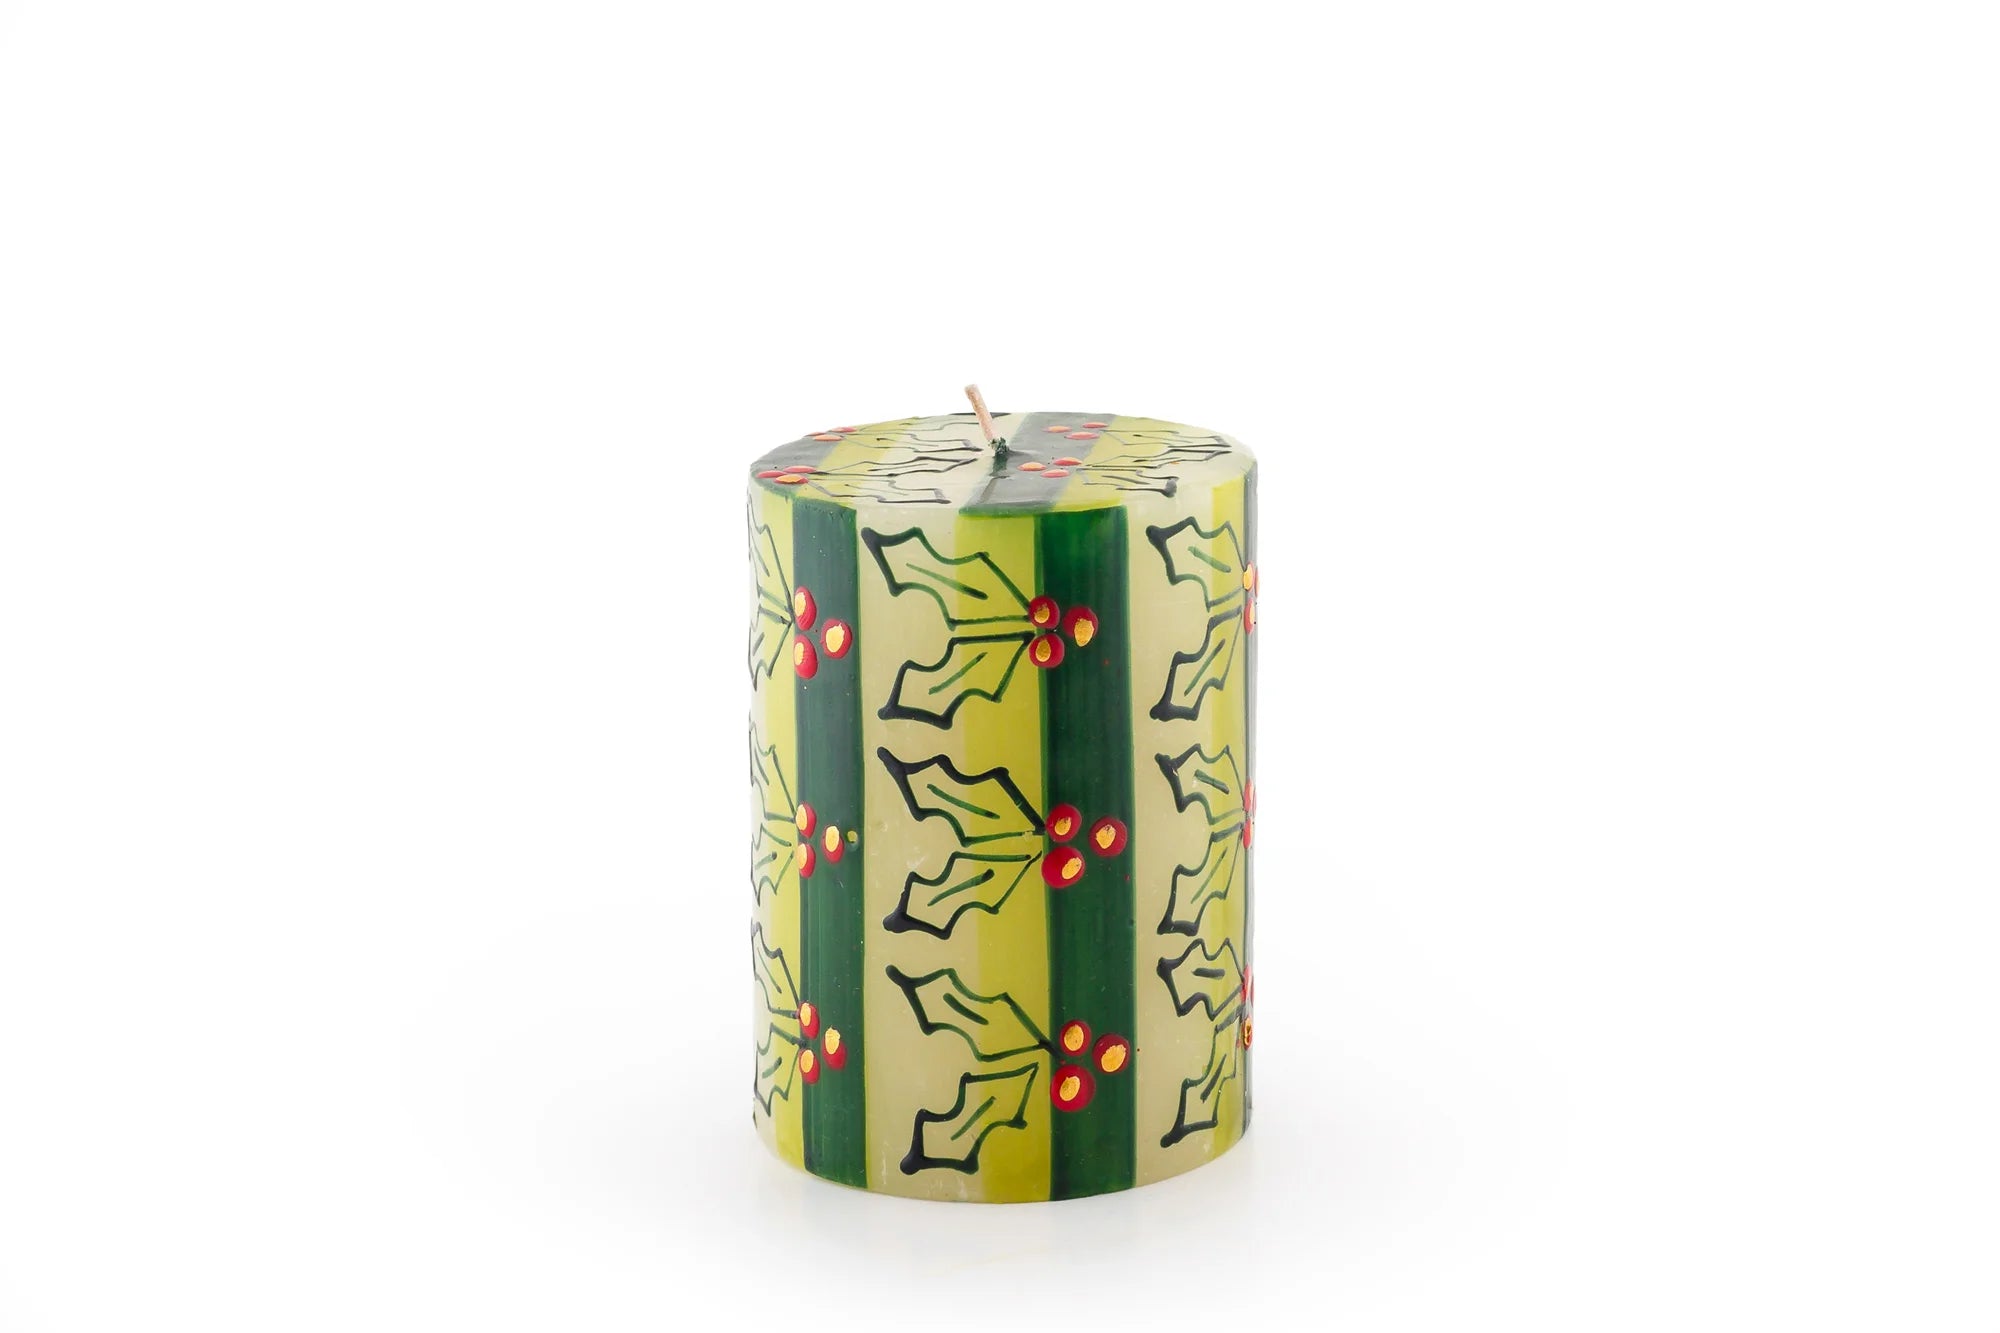 3" x 4" Christmas pillar in various traditional Christmas patterns in red, dark green, light green and gold. This pillar is painted with holly leaves.